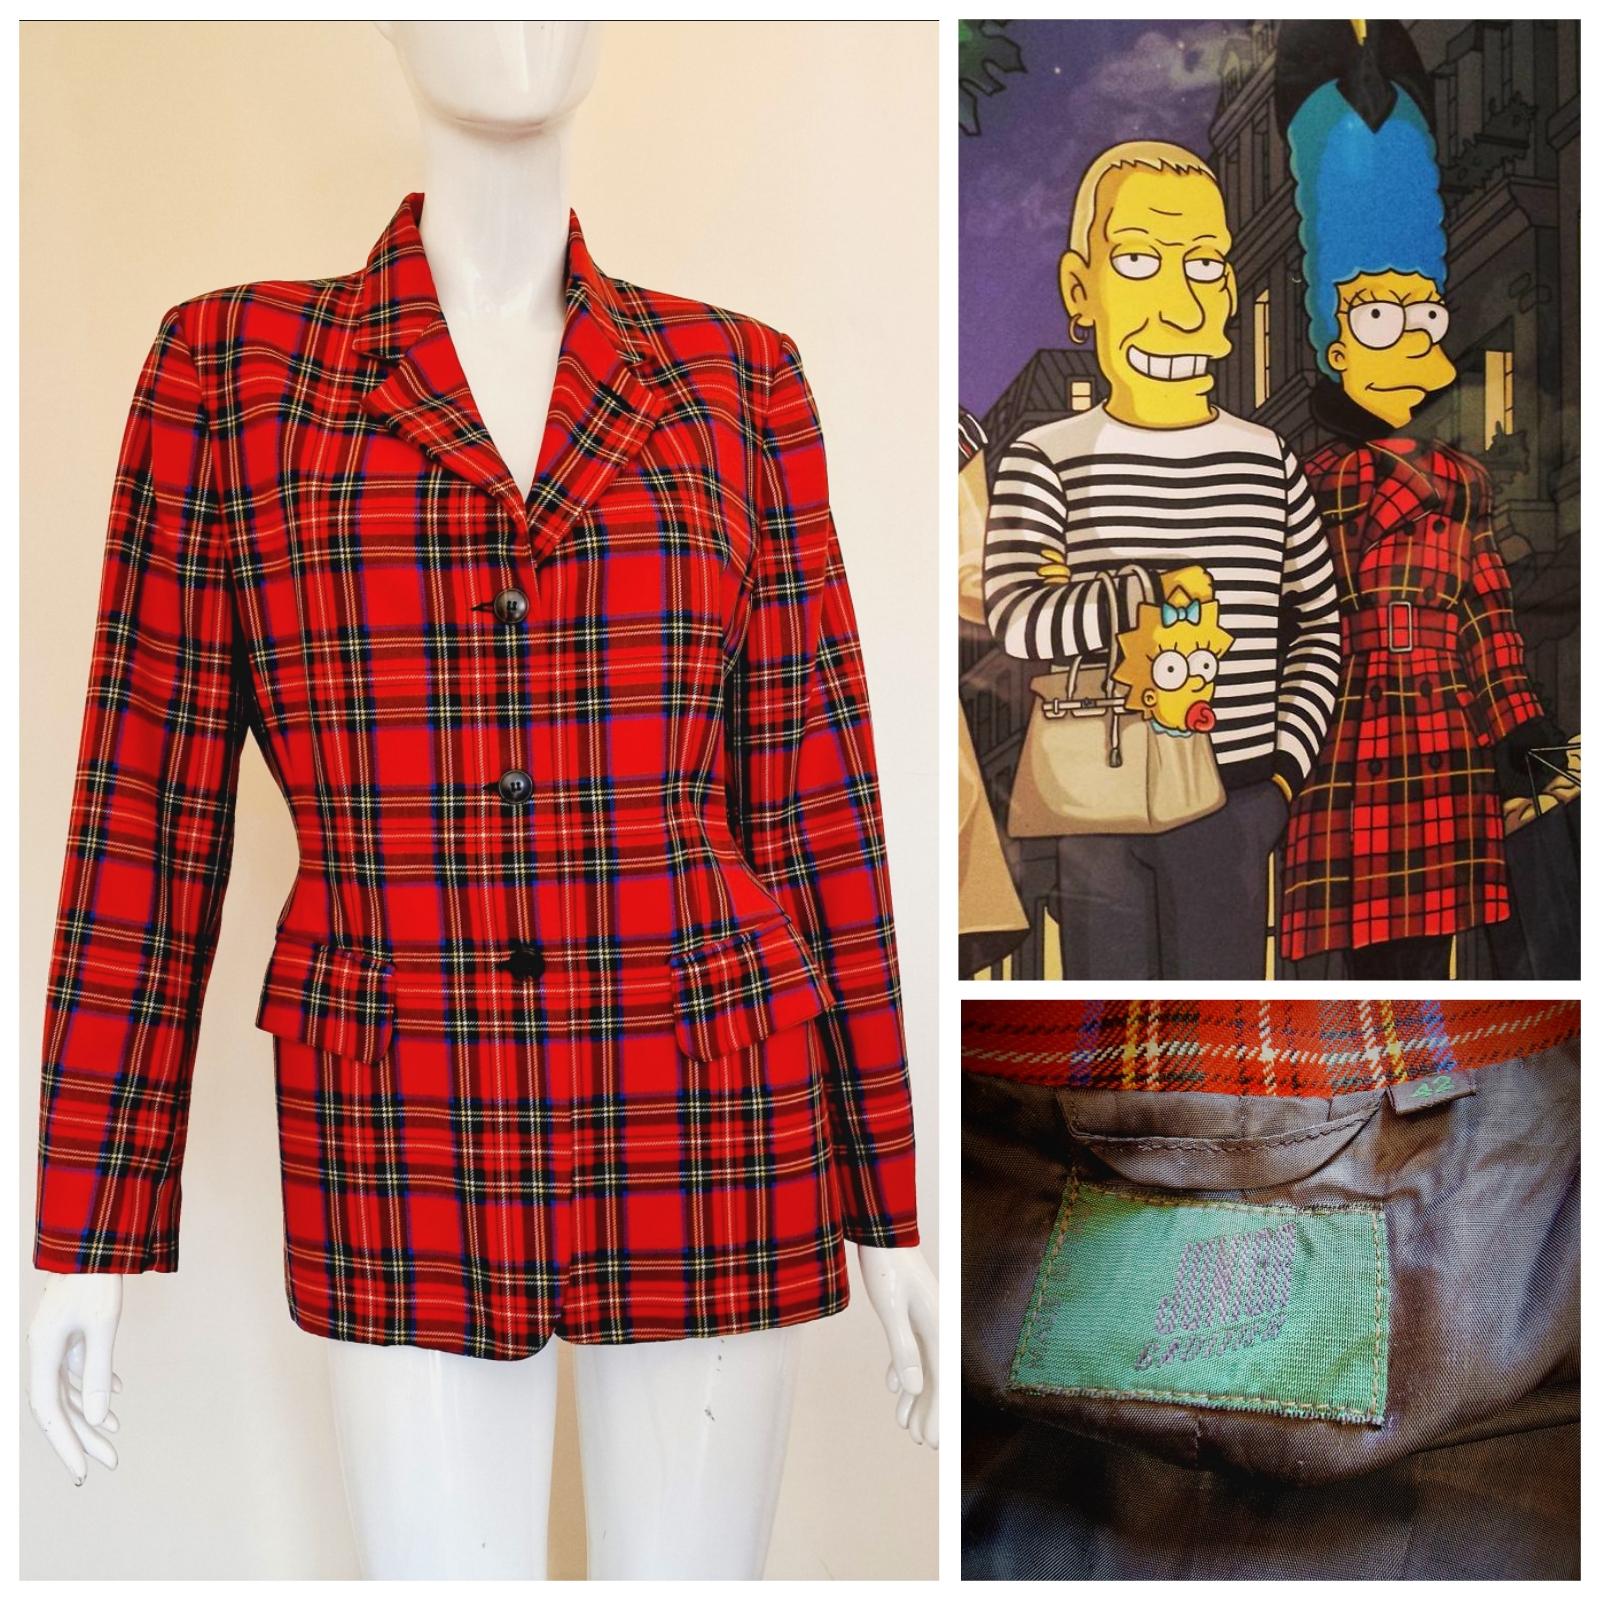 Jean Paul Gaultier red tartan wool blanket jacket. Structured blazer jacket with three button closures, two front flap pockets, accentuated waist and wide hips (wasp waist). With shoulder pads.
100% wool.

EXCELLENT Condition!

SIZE
Marked size: